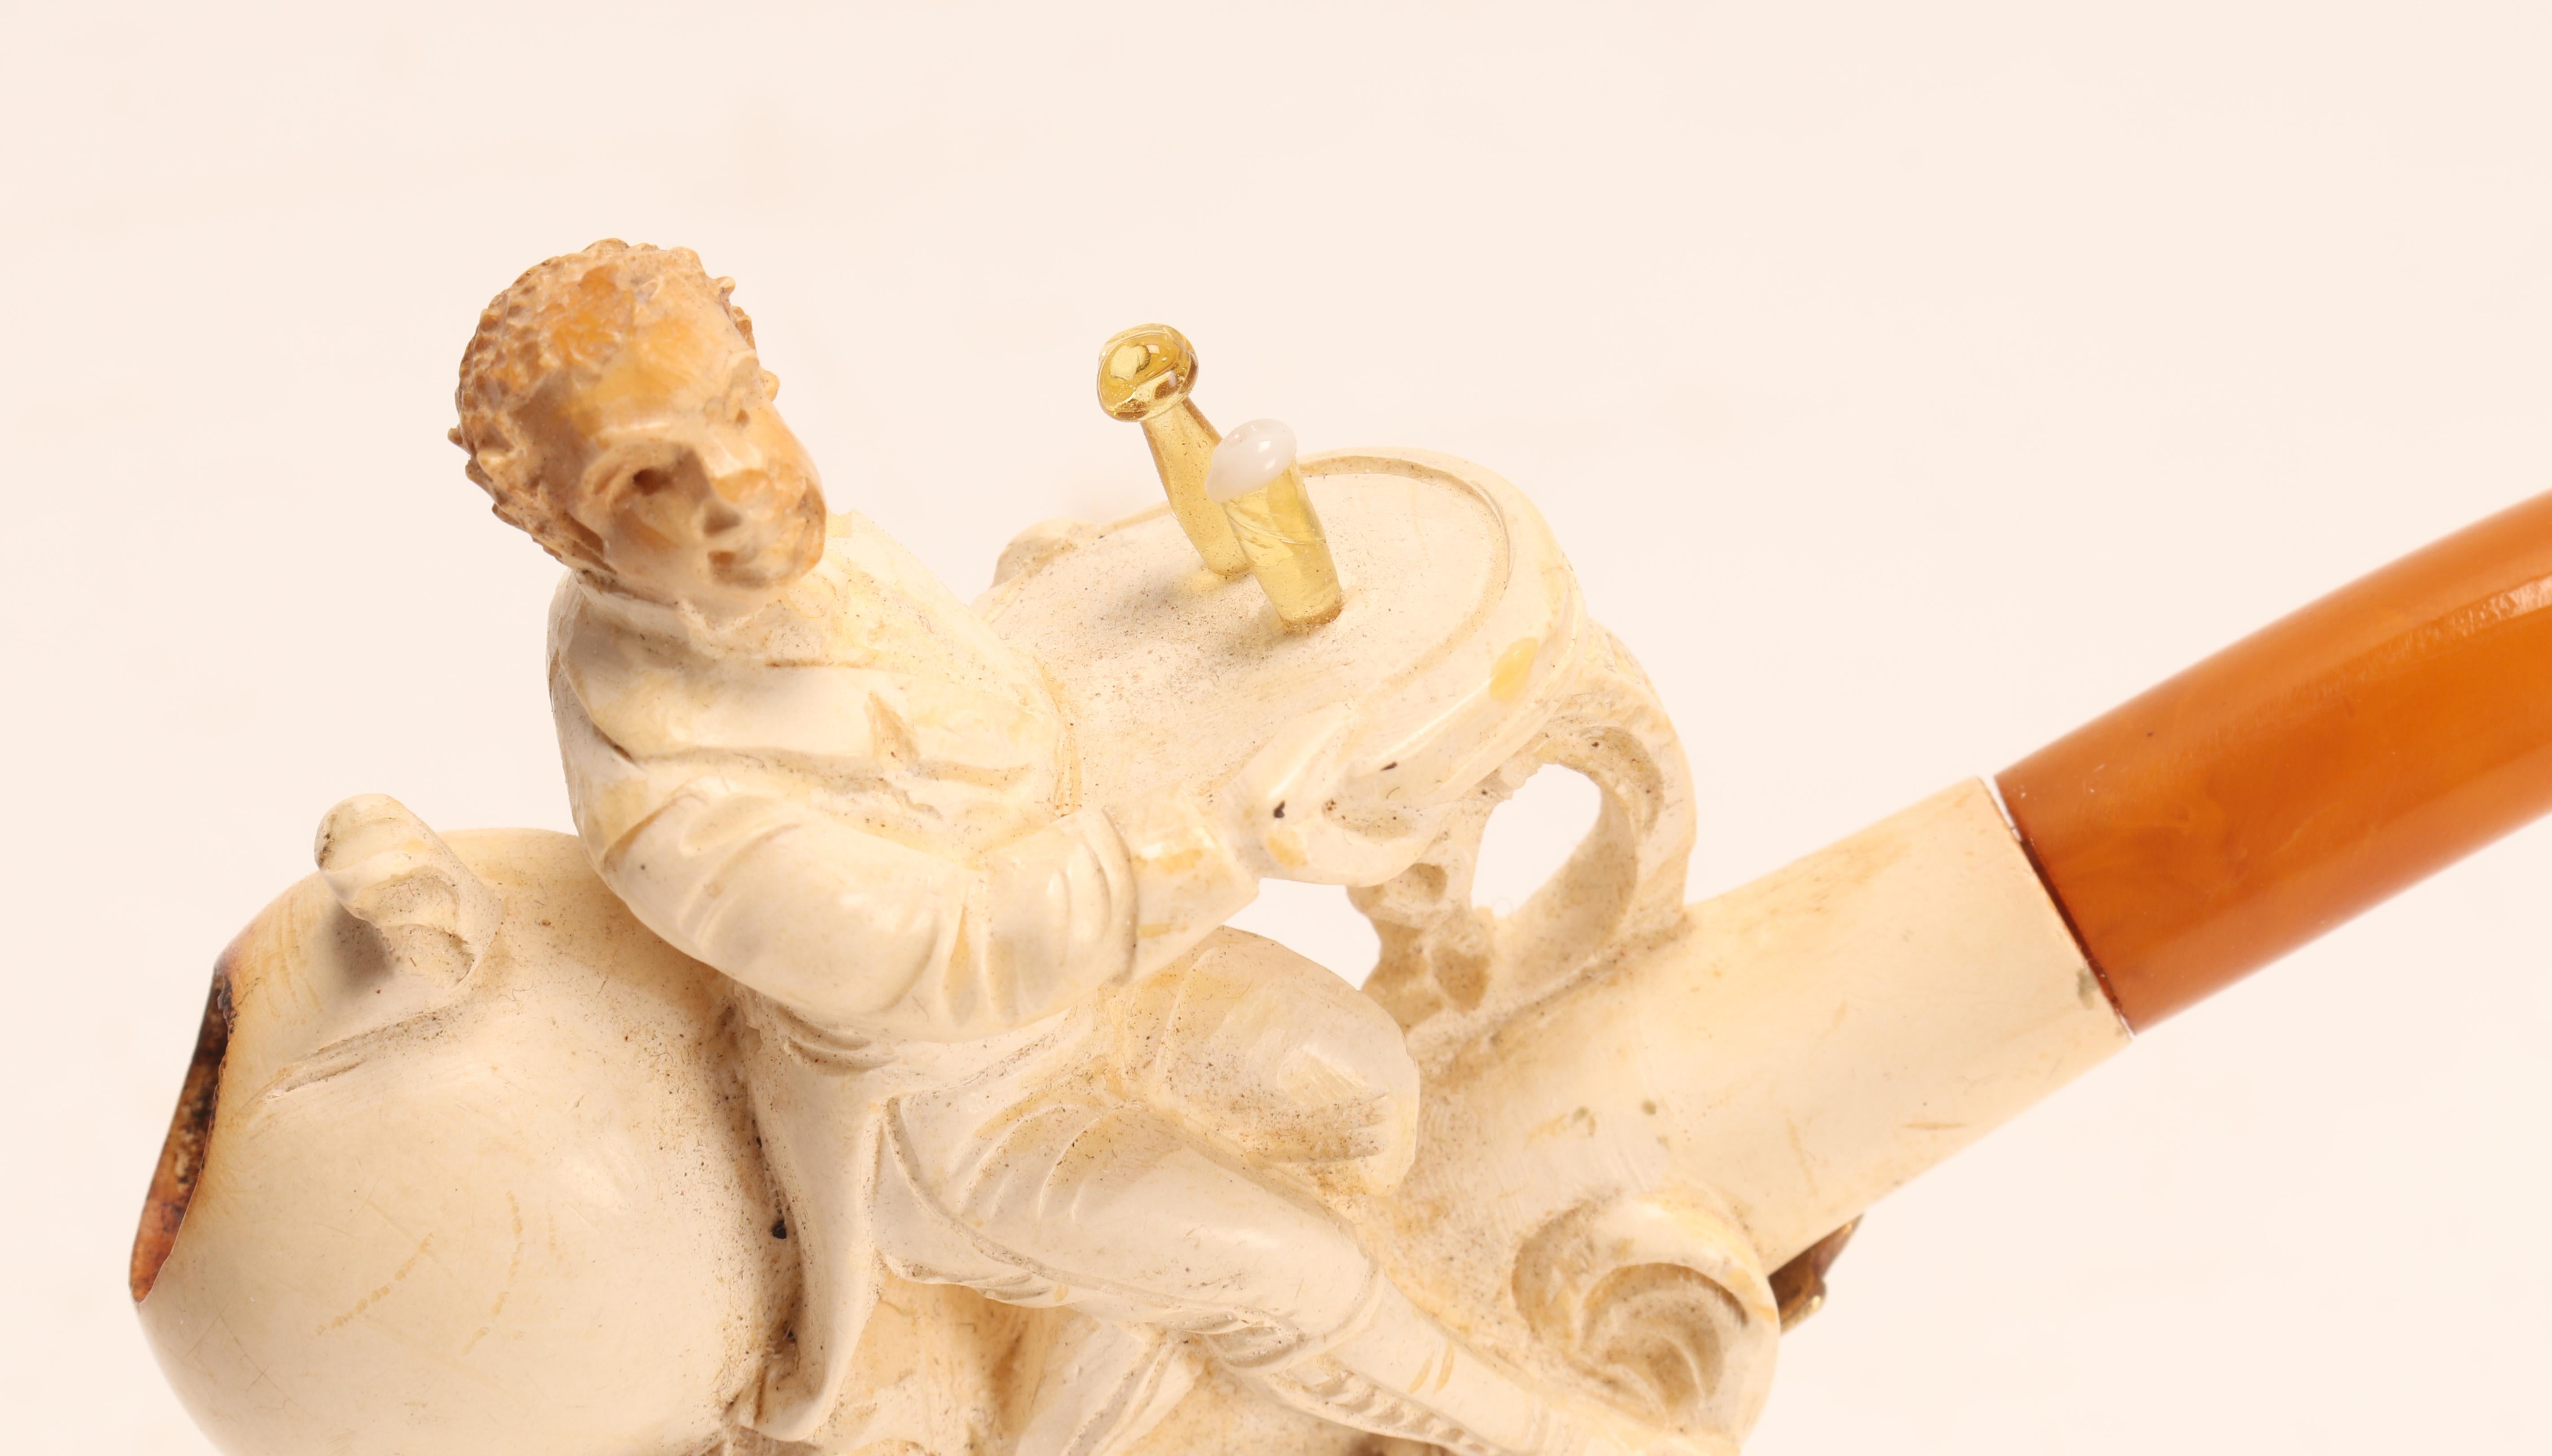 Austrian Meershaum Pipe with a Waiter with the Face of a Monkey, Vienna, 1880 For Sale